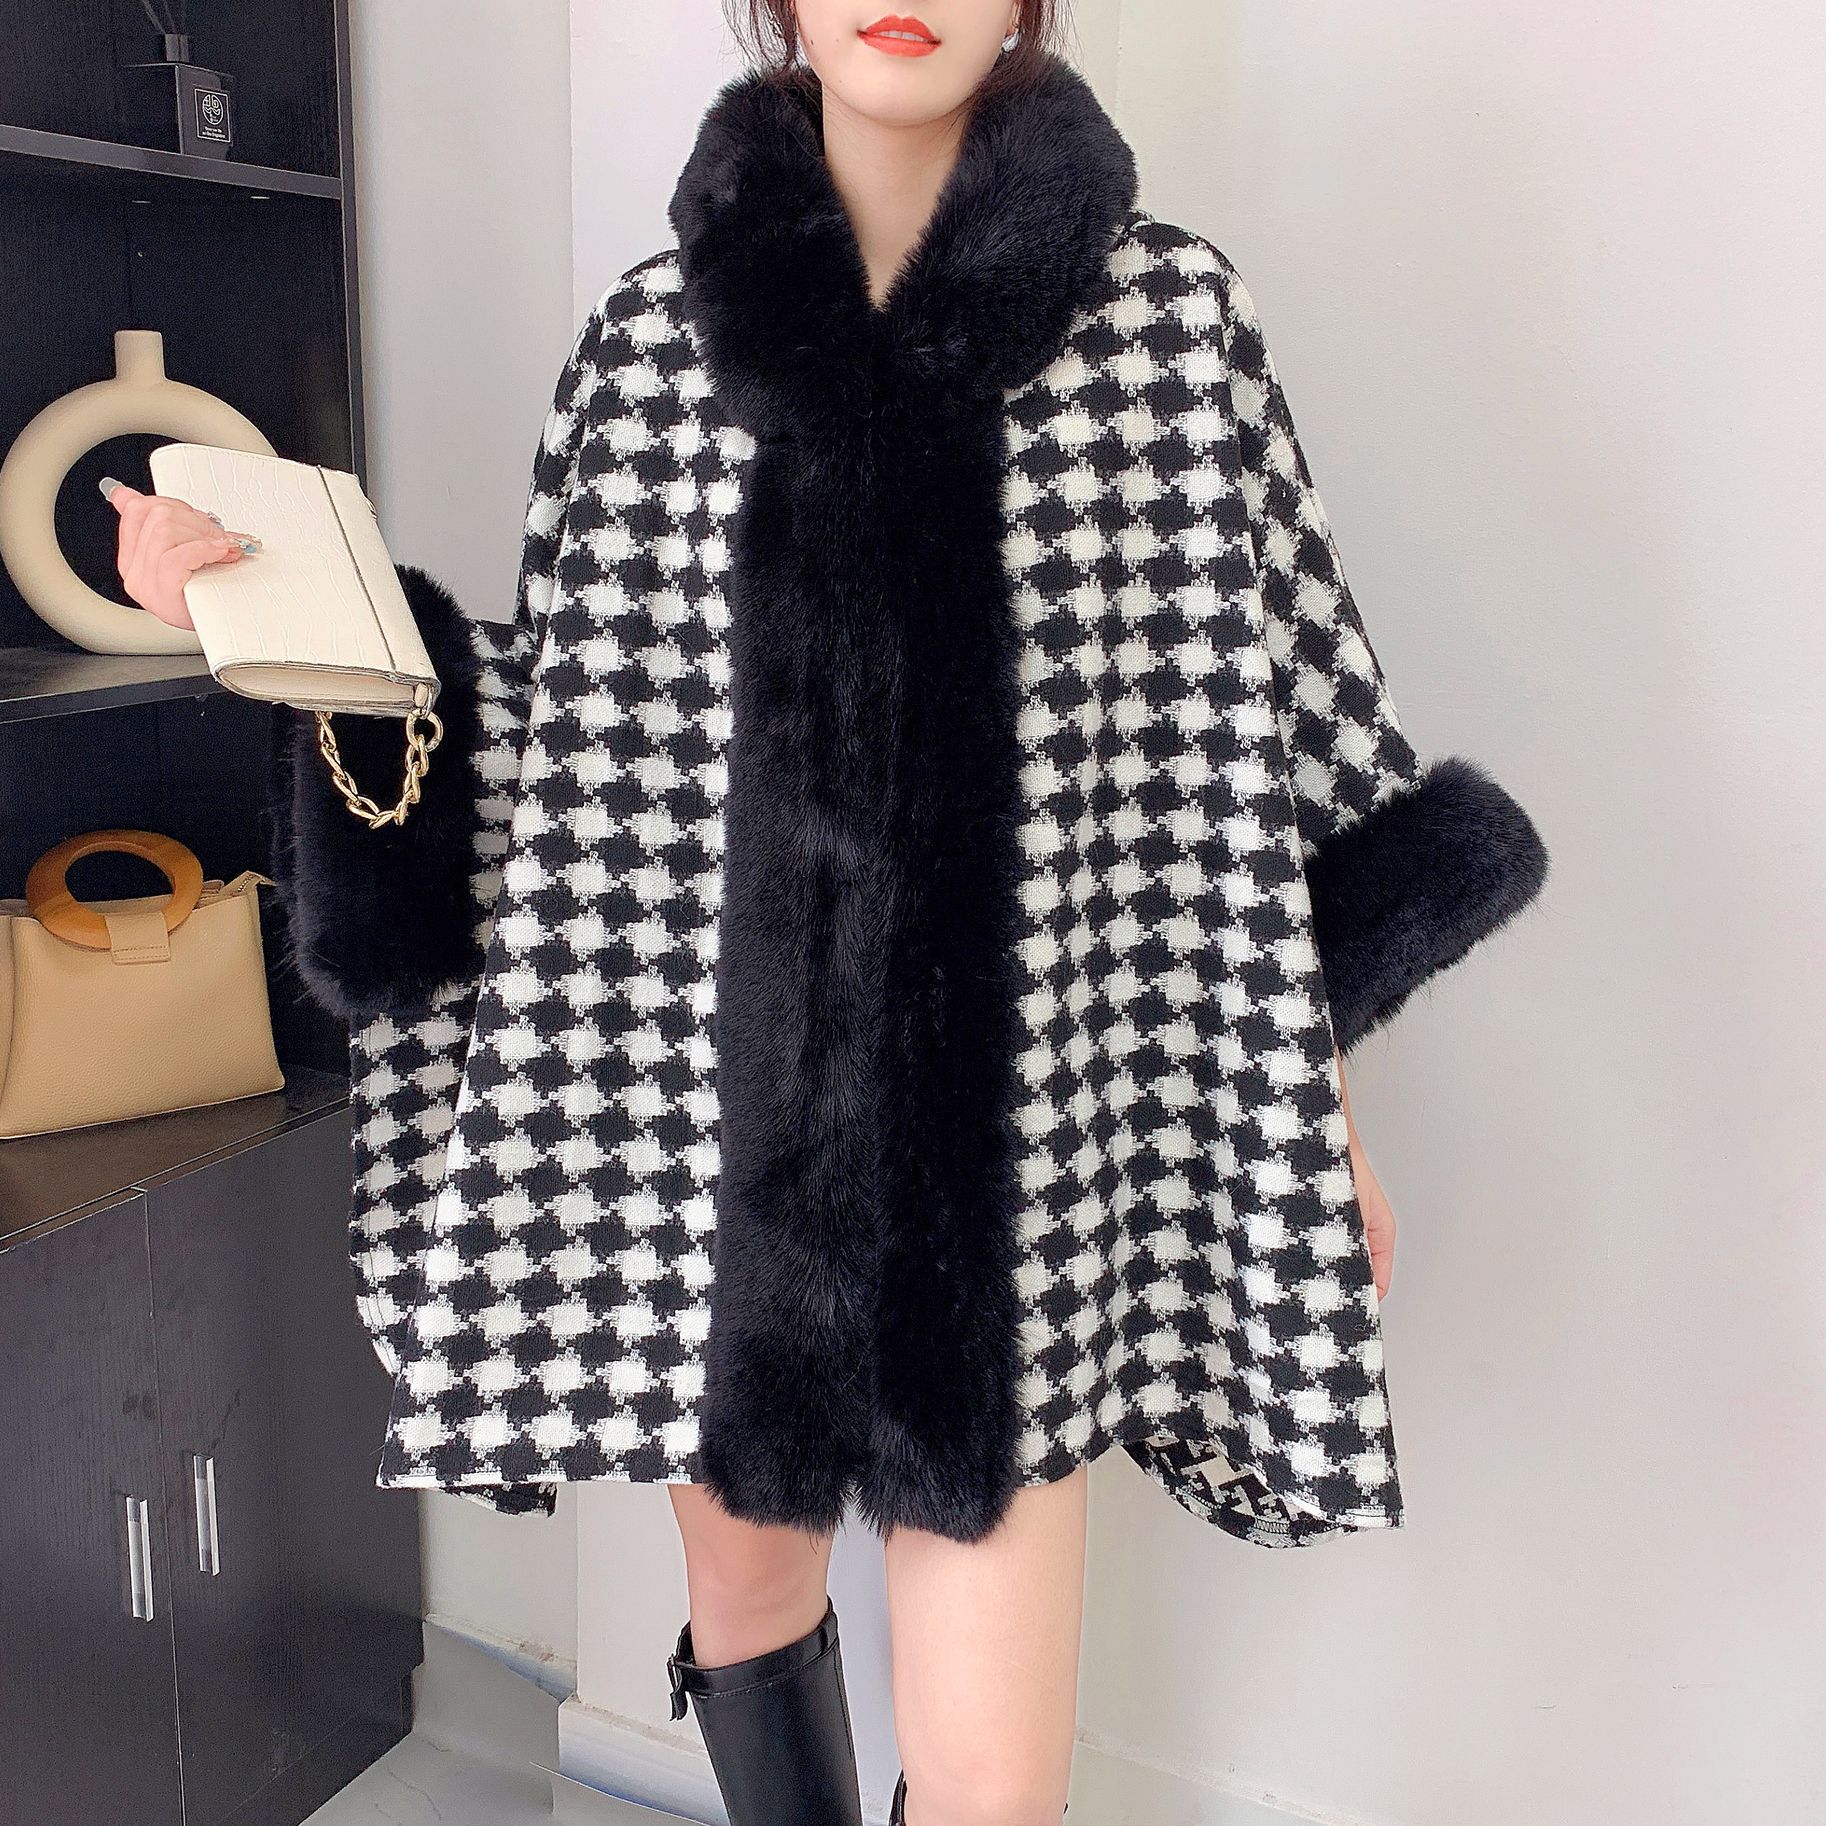 Cardigan Winter Fashionable Stylish High-End Sweater Coat Women‘s Clothing Autumn and Winter Net Infrared Fur Collar Plaid Shawl Cape